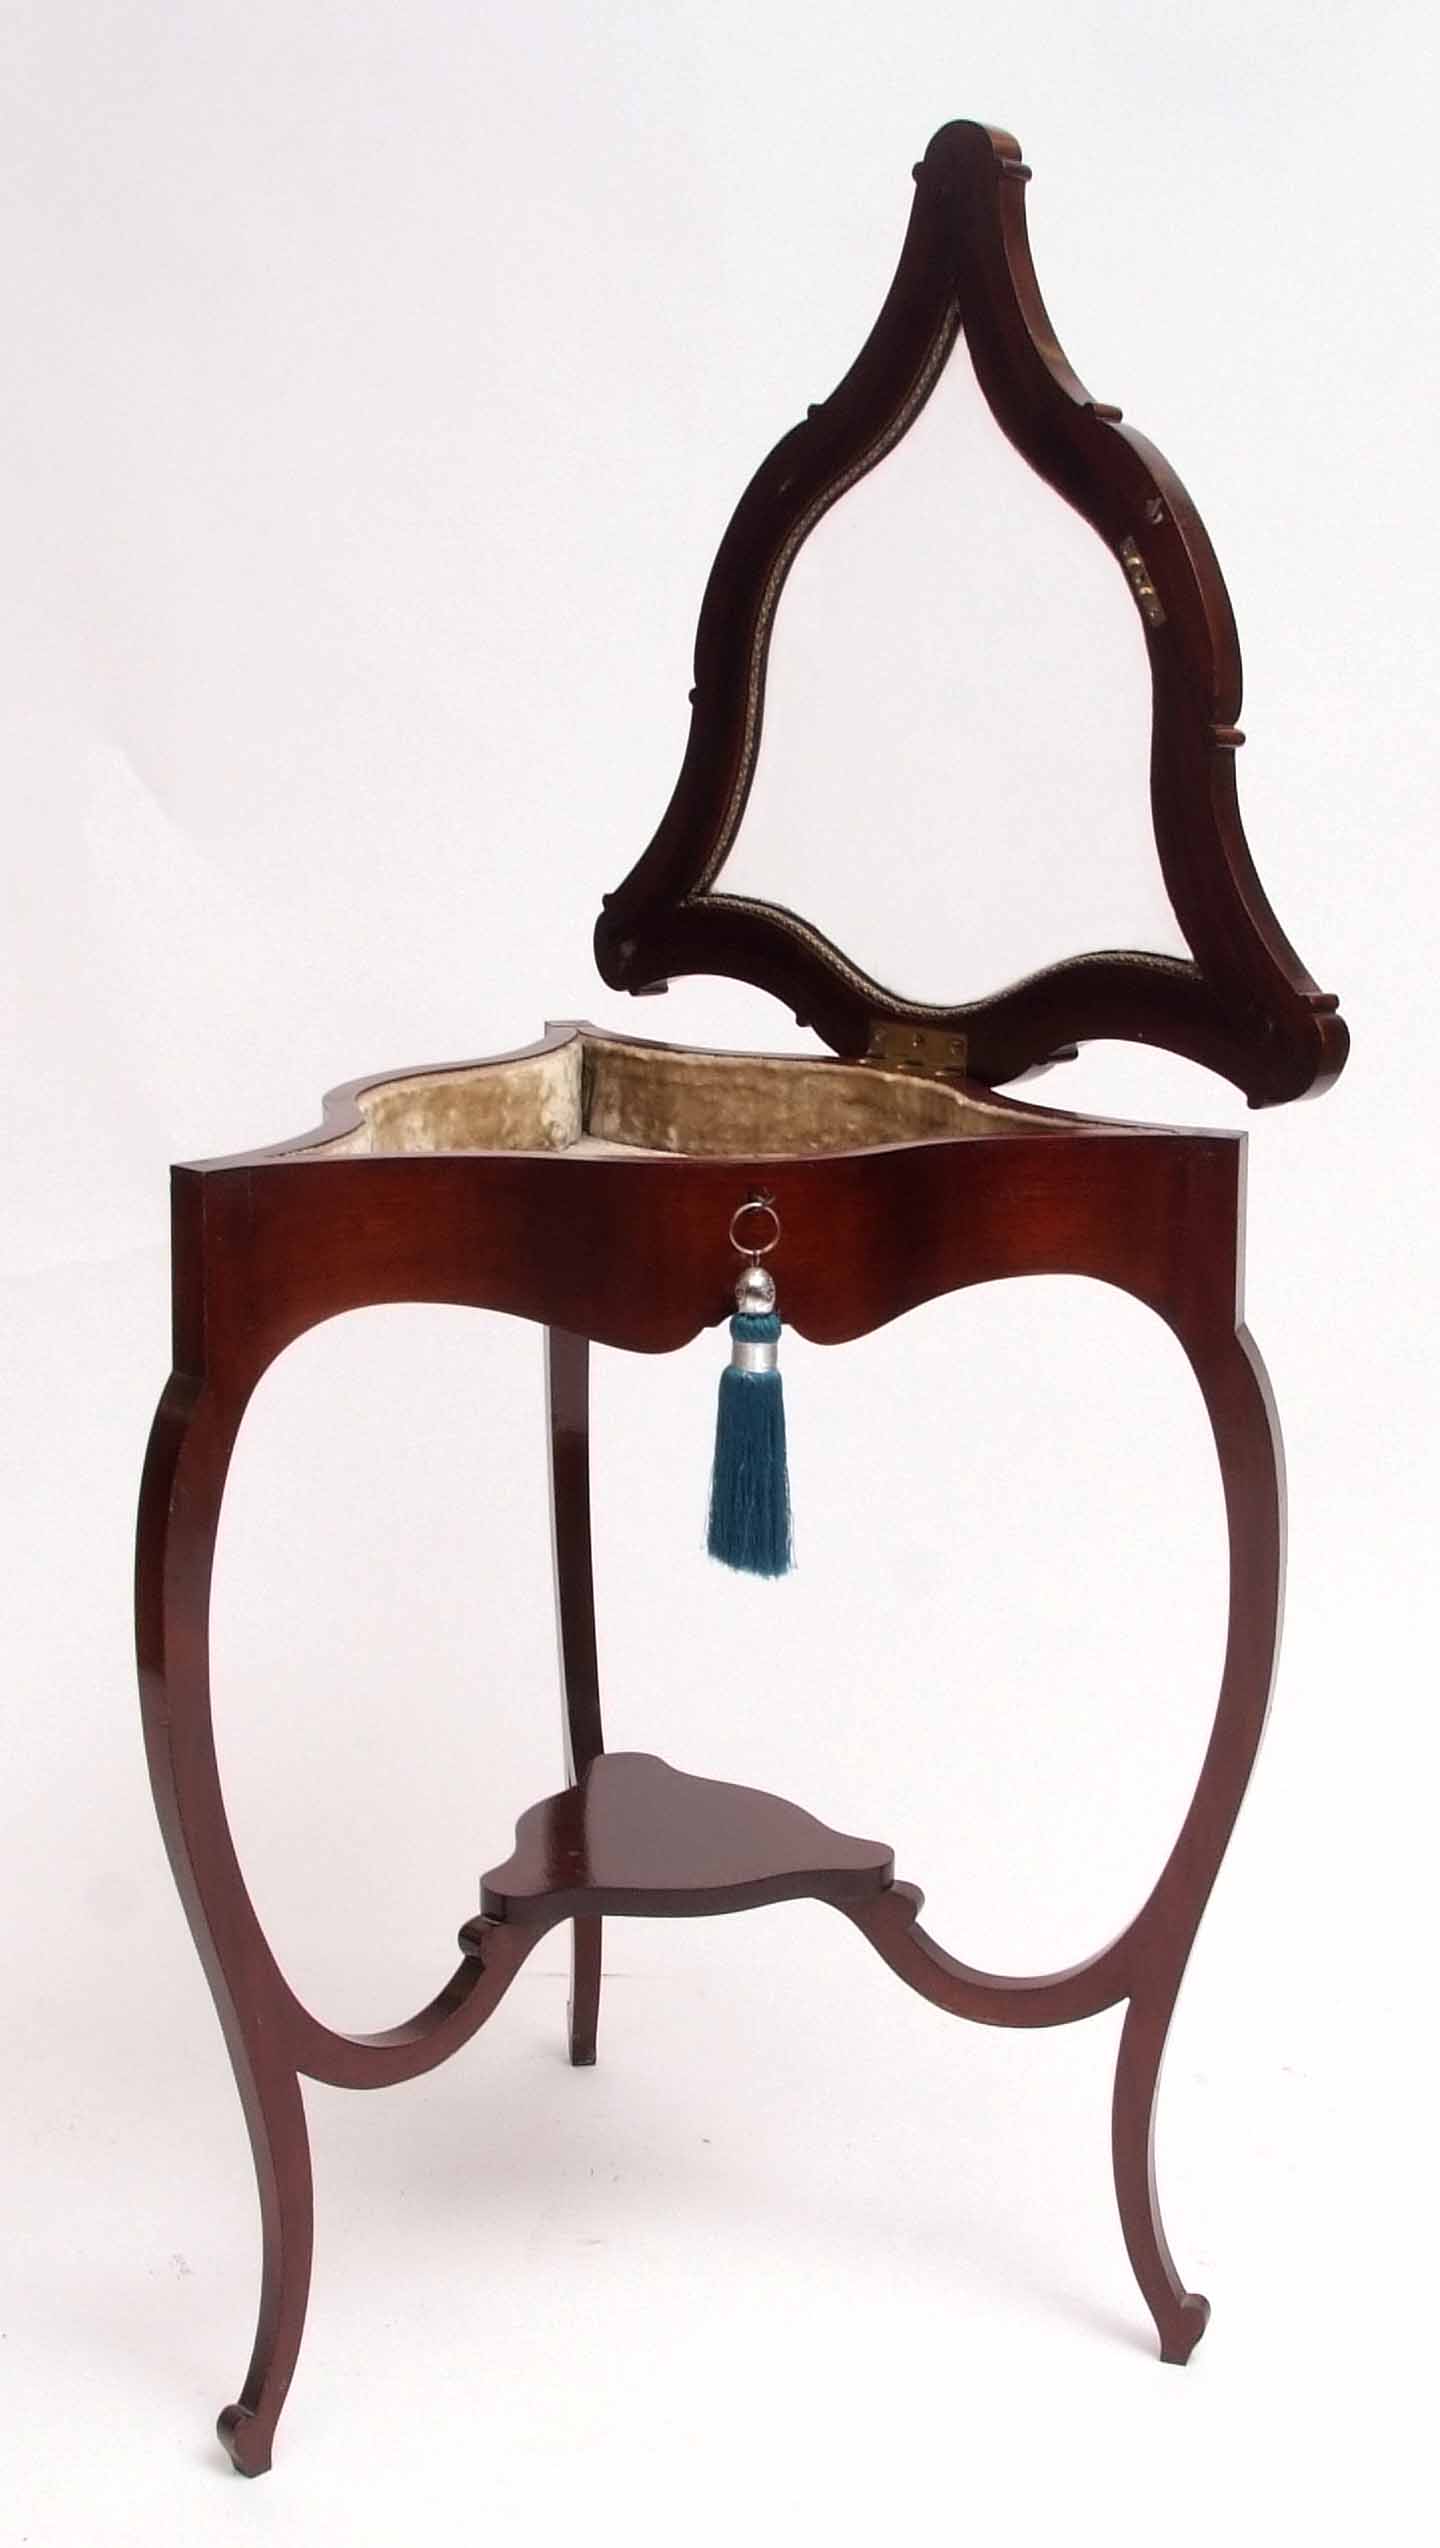 Mahogany bijouterie table of shaped triangular form, the lifting lid with central bevelled glass - Image 4 of 5